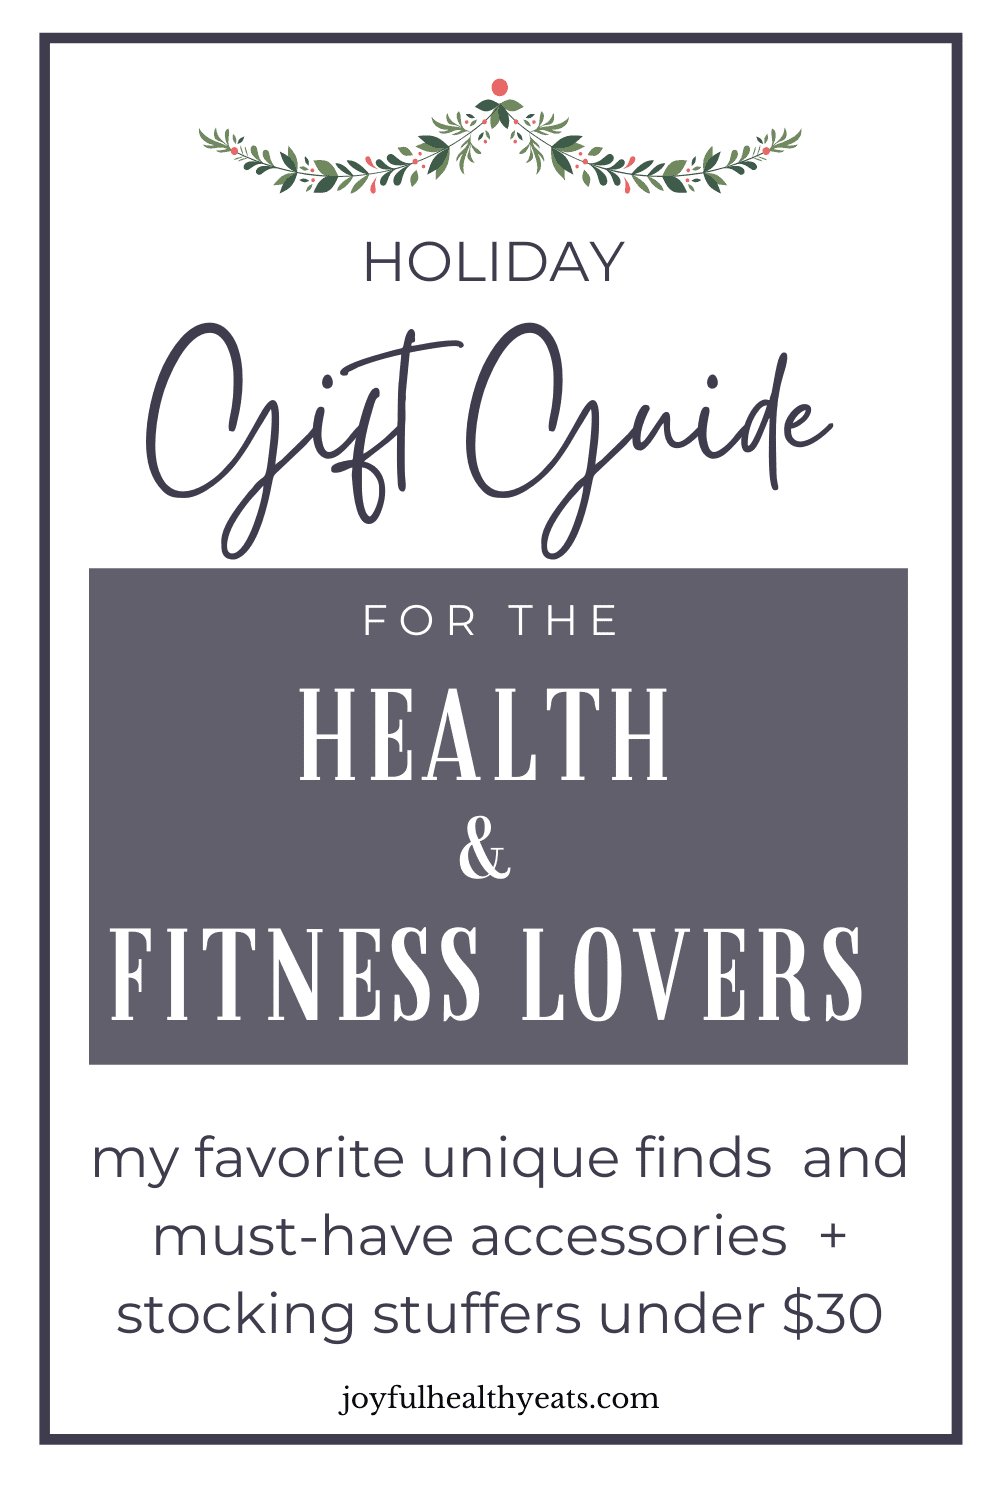 https://www.joyfulhealthyeats.com/wp-content/uploads/2020/11/Health-Fitness-Gift-Guide-Cover.png